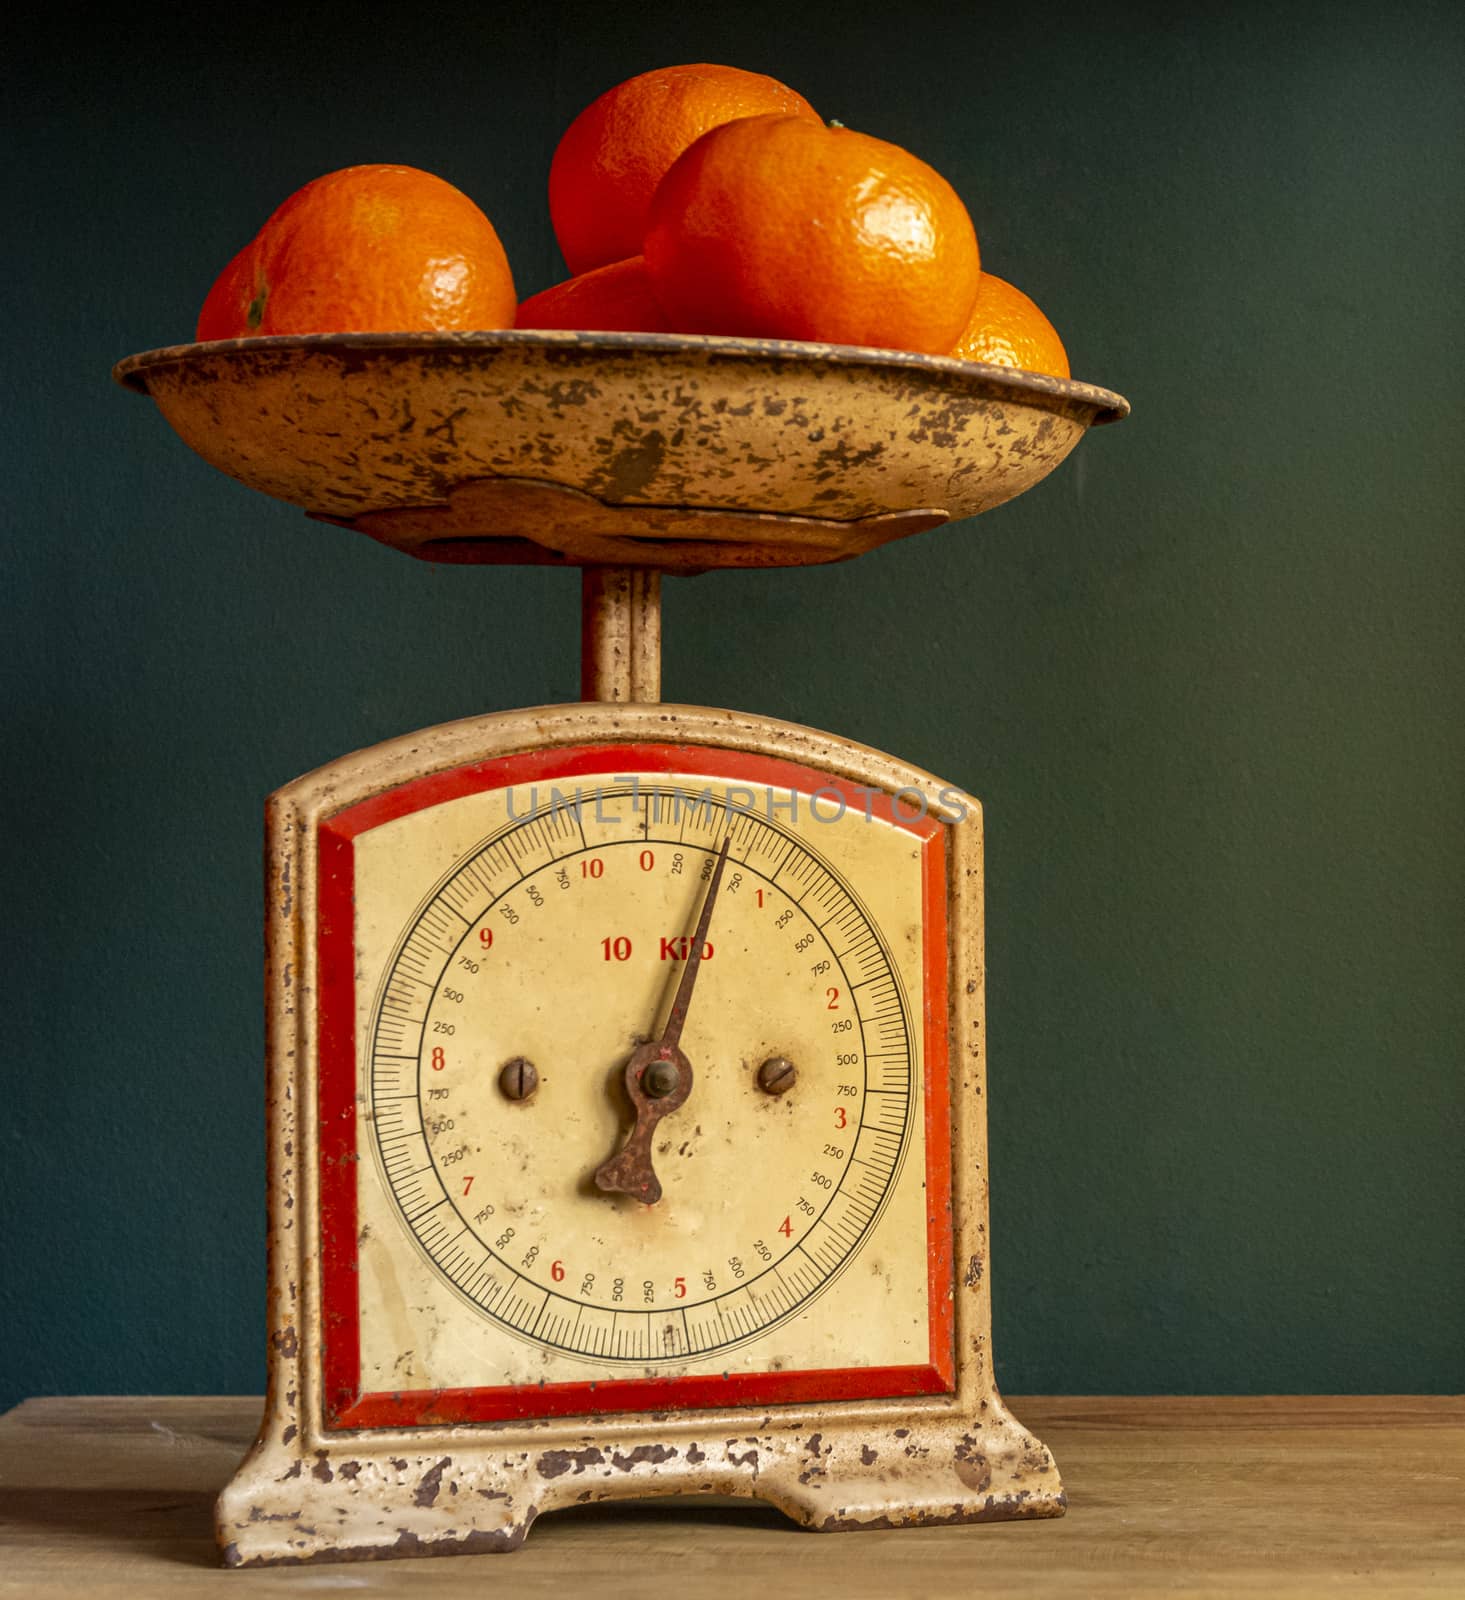 Weighing tangerines in a retro, vintage and worn out scale or balance, on a wooden plank against a guatemala green wall.